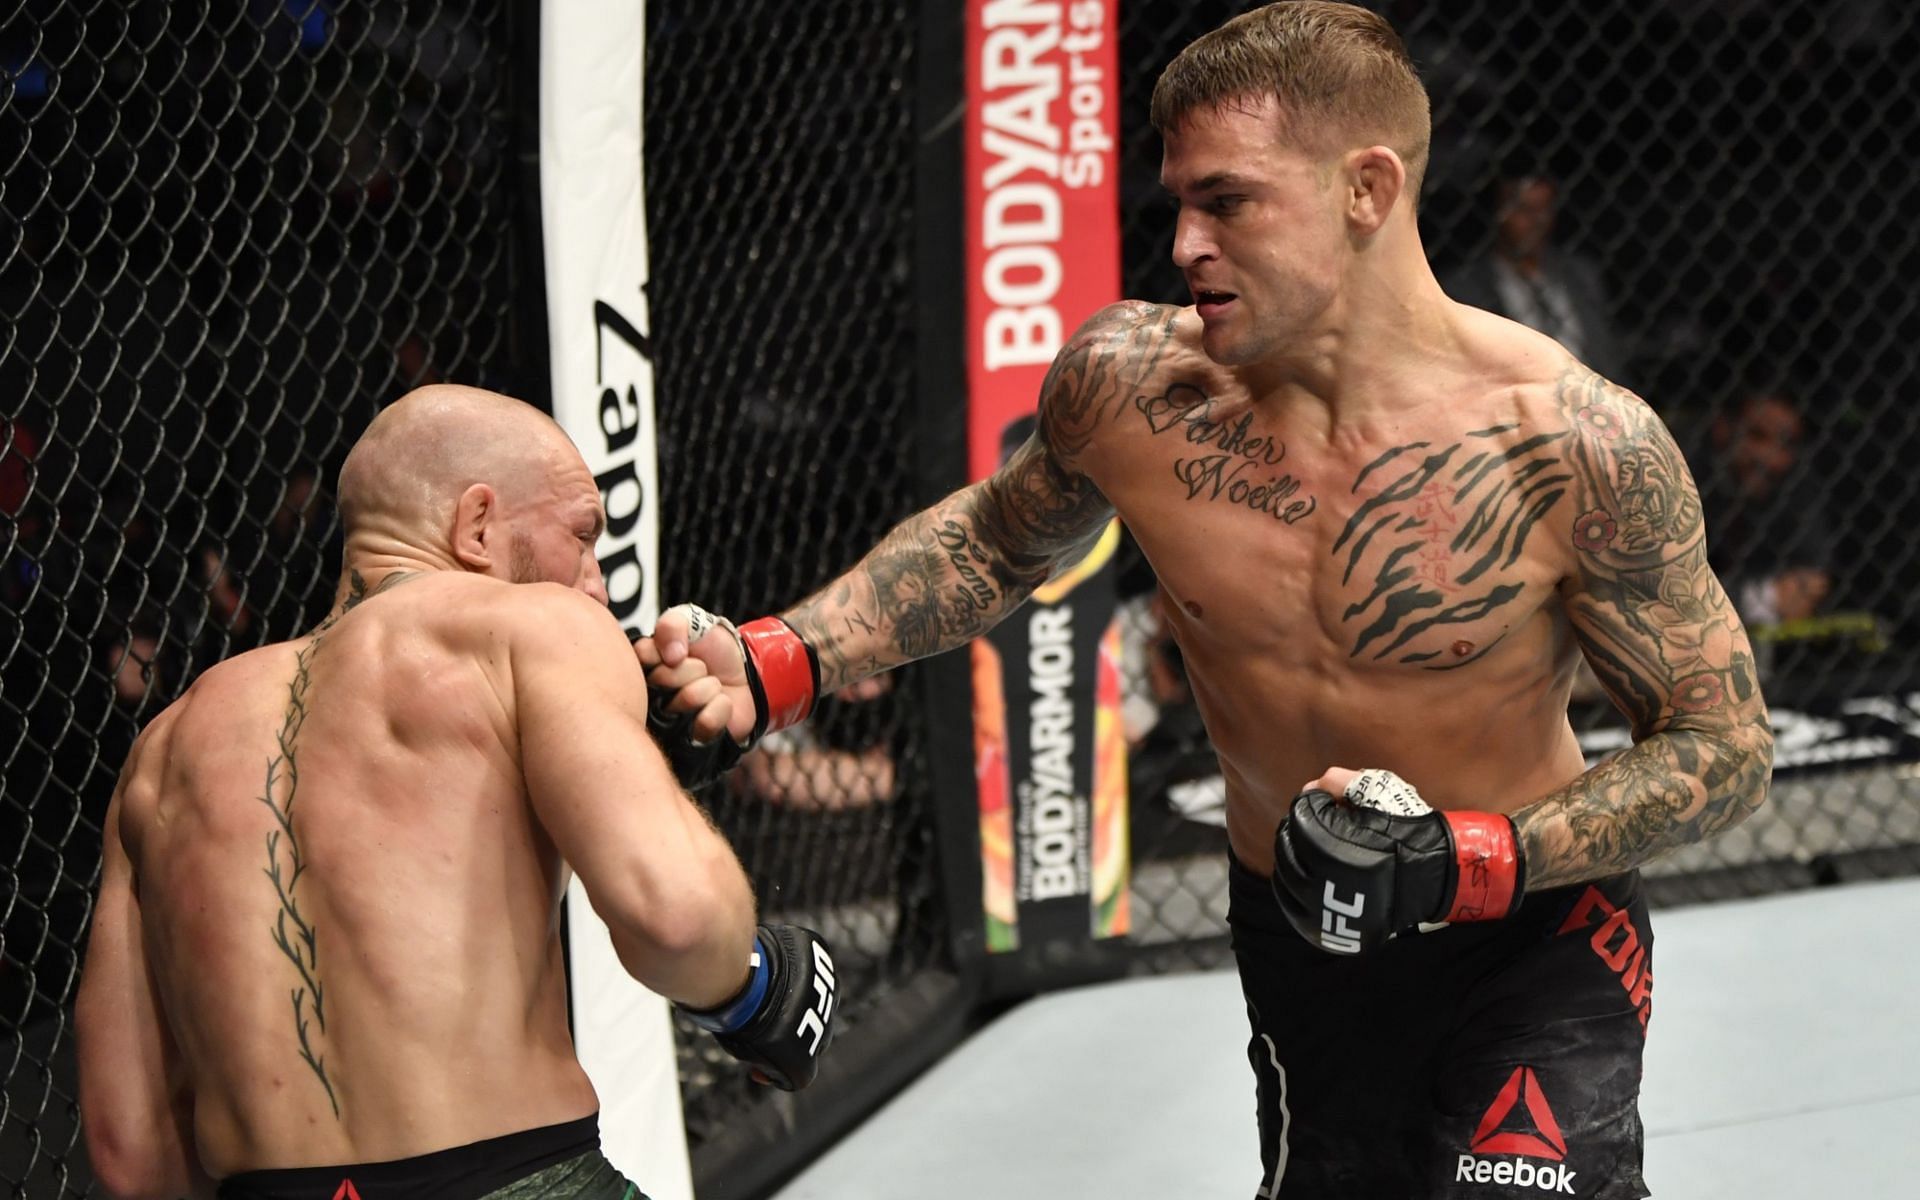 Conor McGregor was given a taste of his own medicine by Dustin Poirier at UFC 257